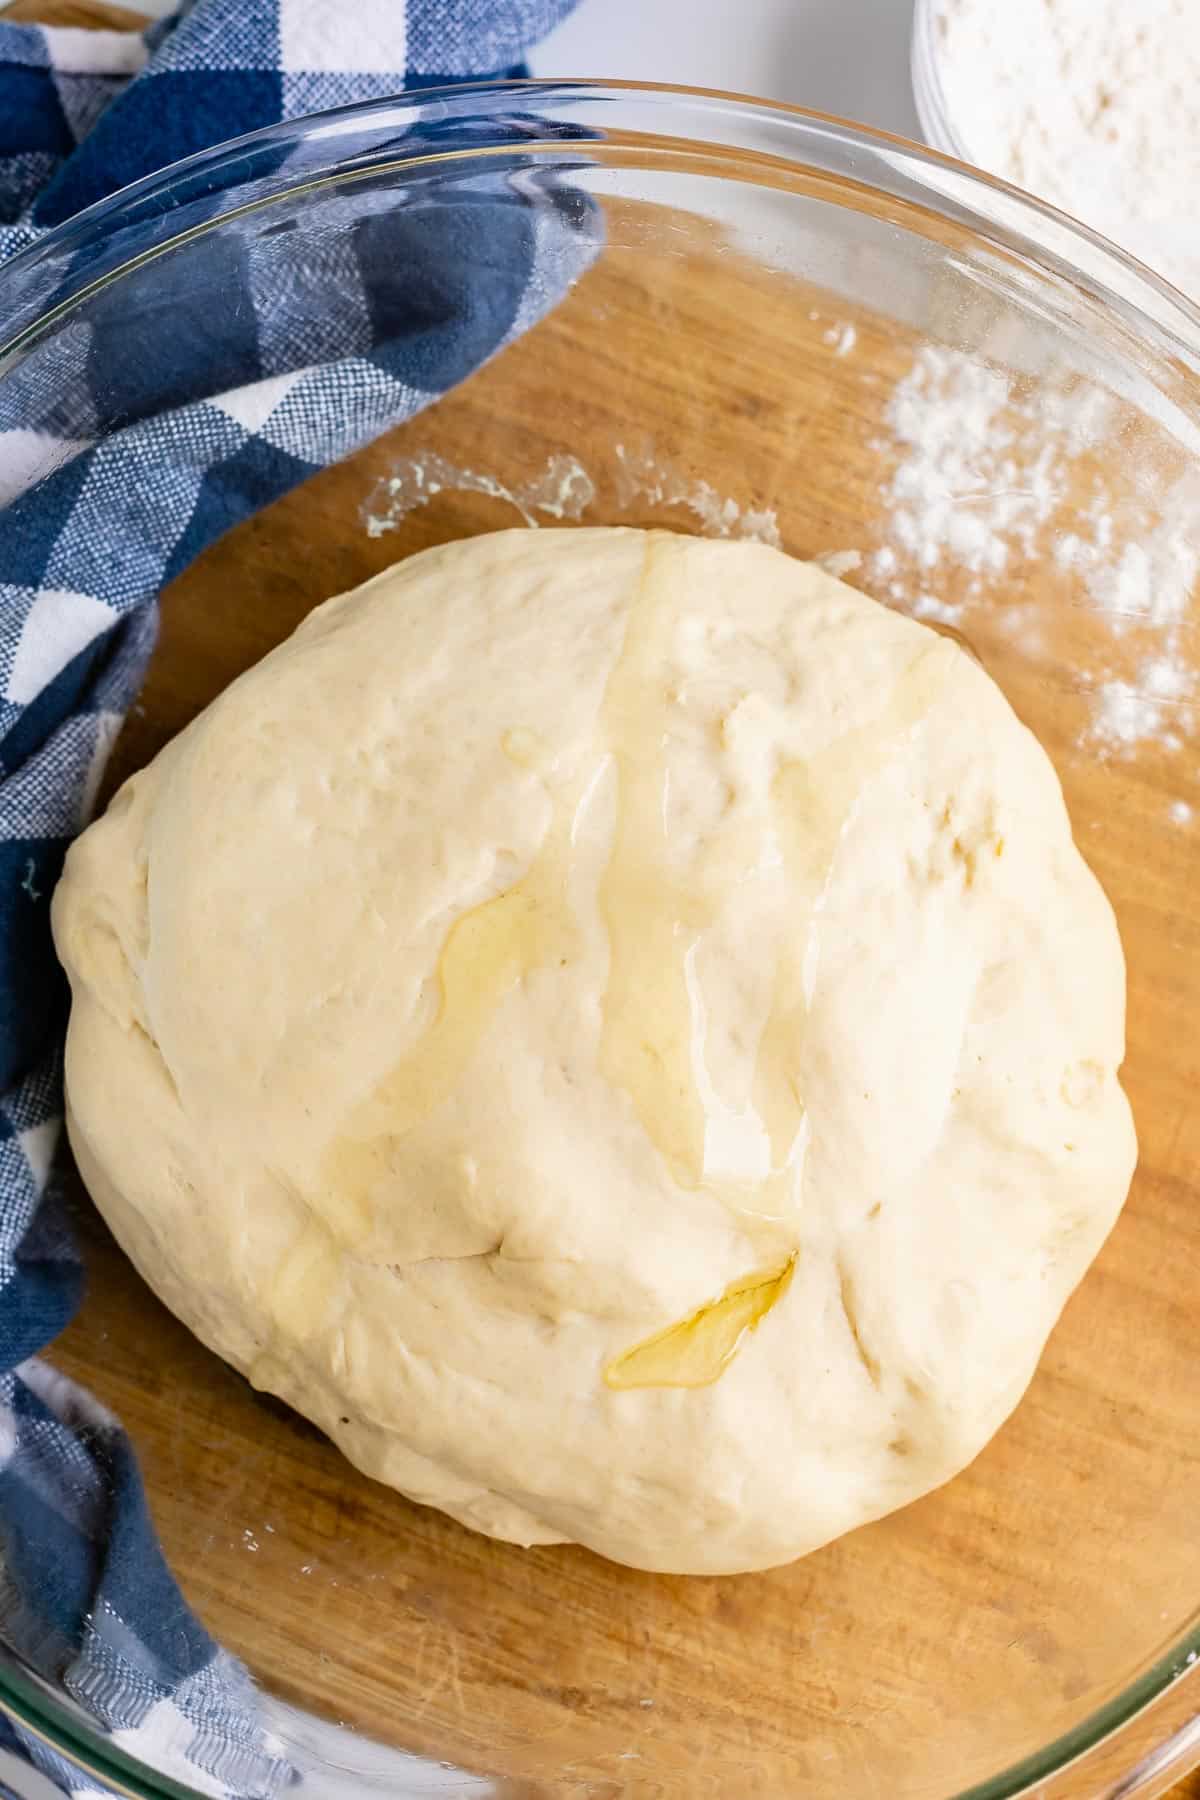 How to Make Homemade Pizza Dough from Scratch - The Food Charlatan